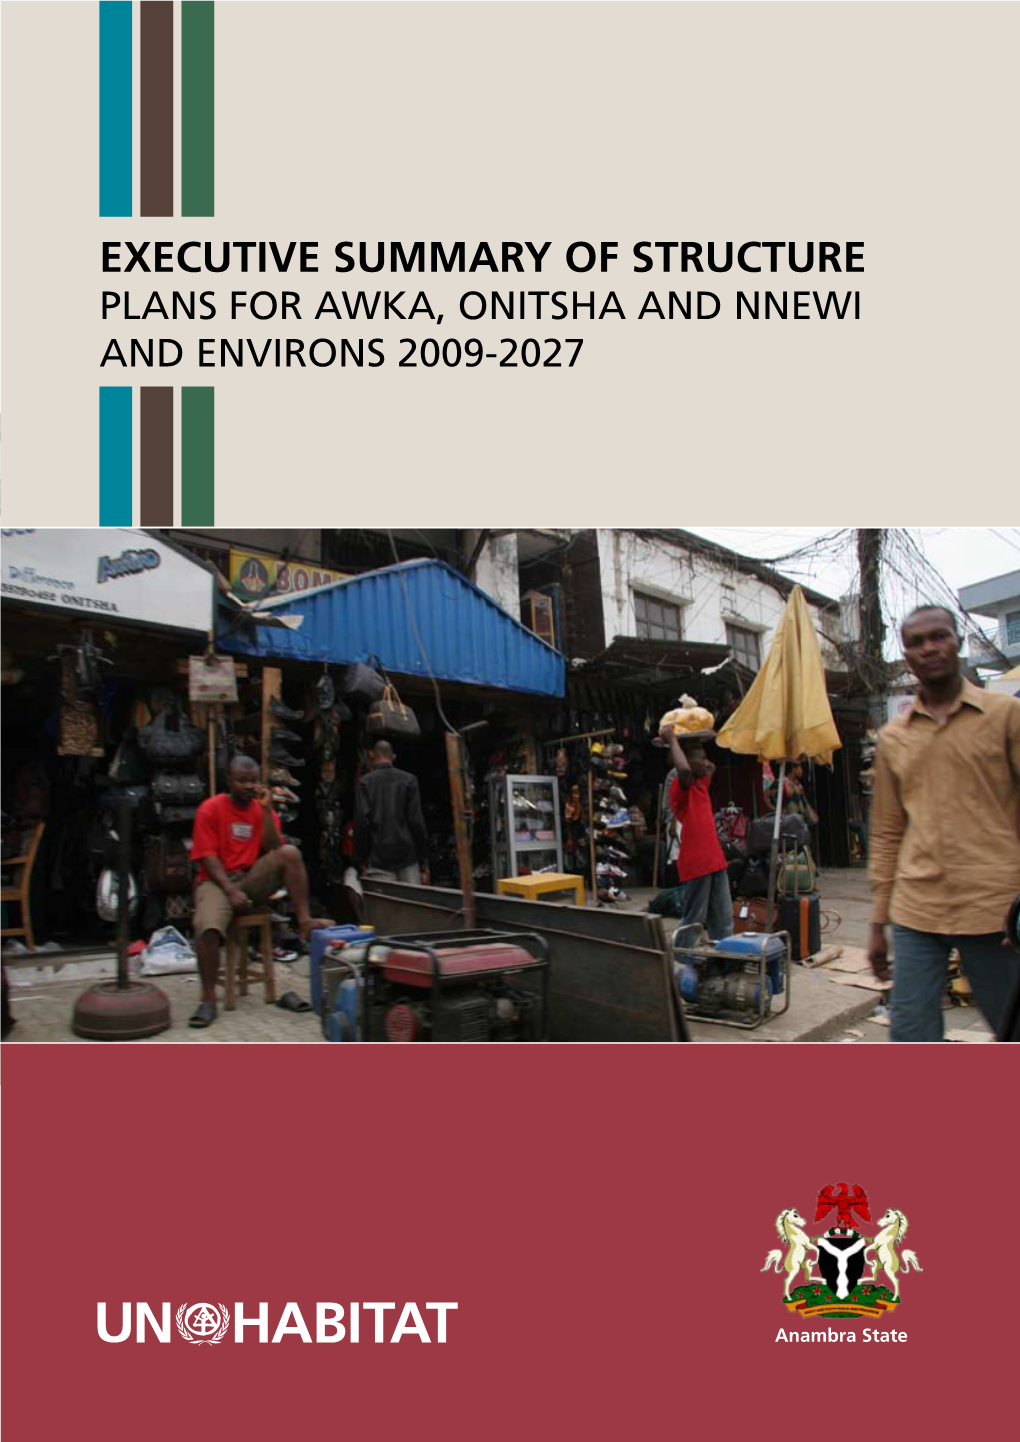 Executive Summary of Structure Plans for Awka, Onitsha and Nnewi and Environs 2009-2027